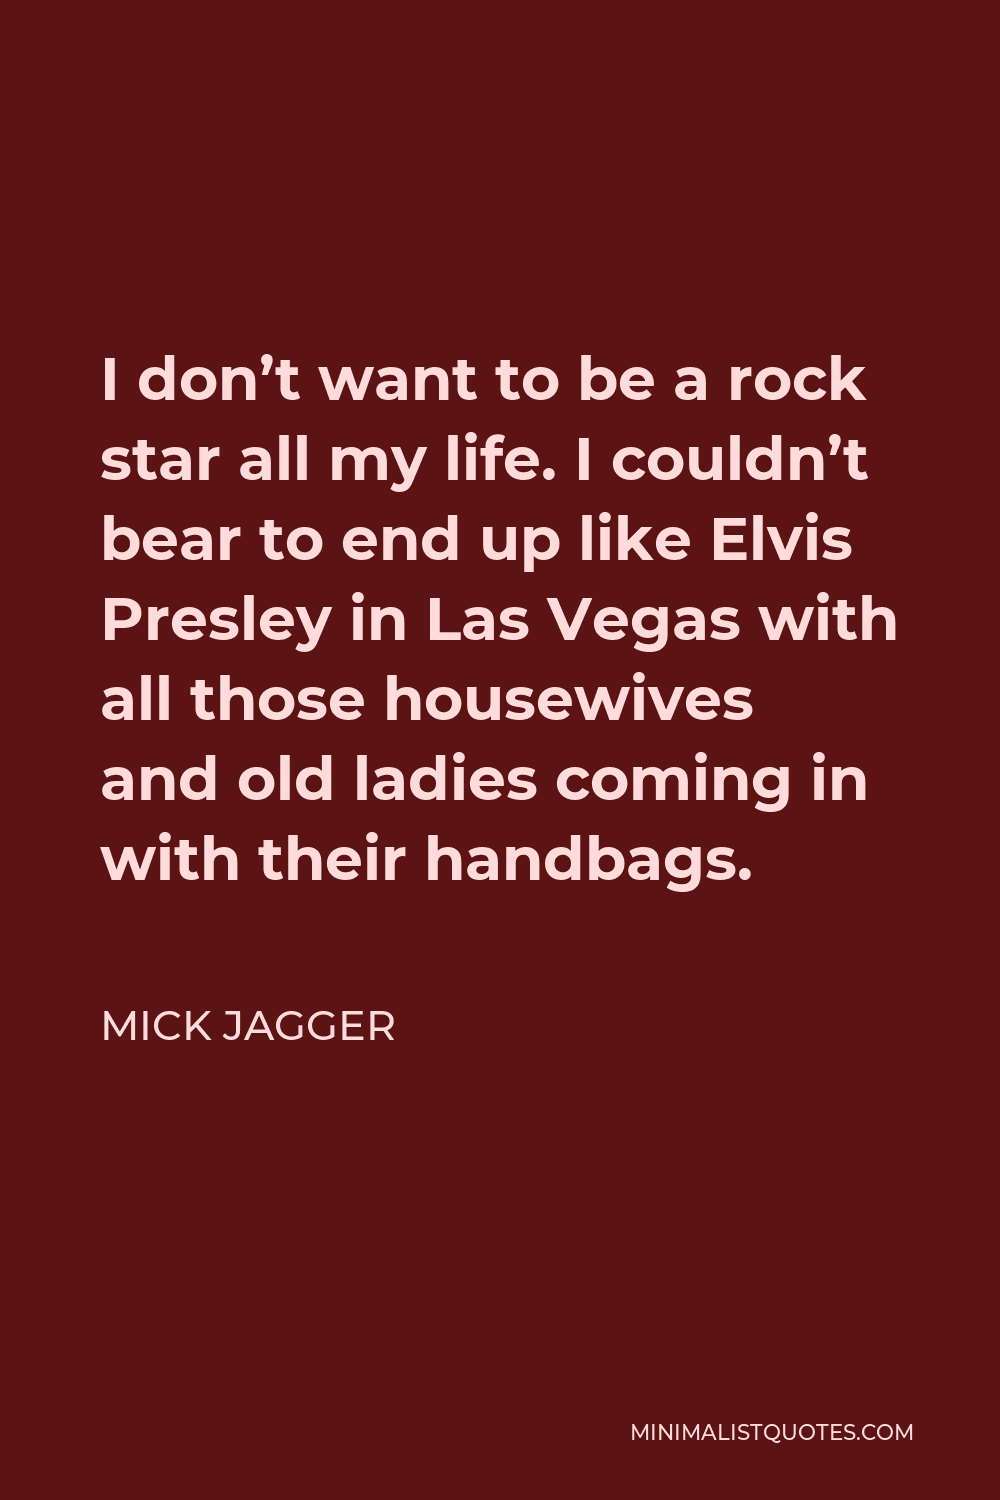 Mick Jagger Quote - I don’t want to be a rock star all my life. I couldn’t bear to end up like Elvis Presley in Las Vegas with all those housewives and old ladies coming in with their handbags.